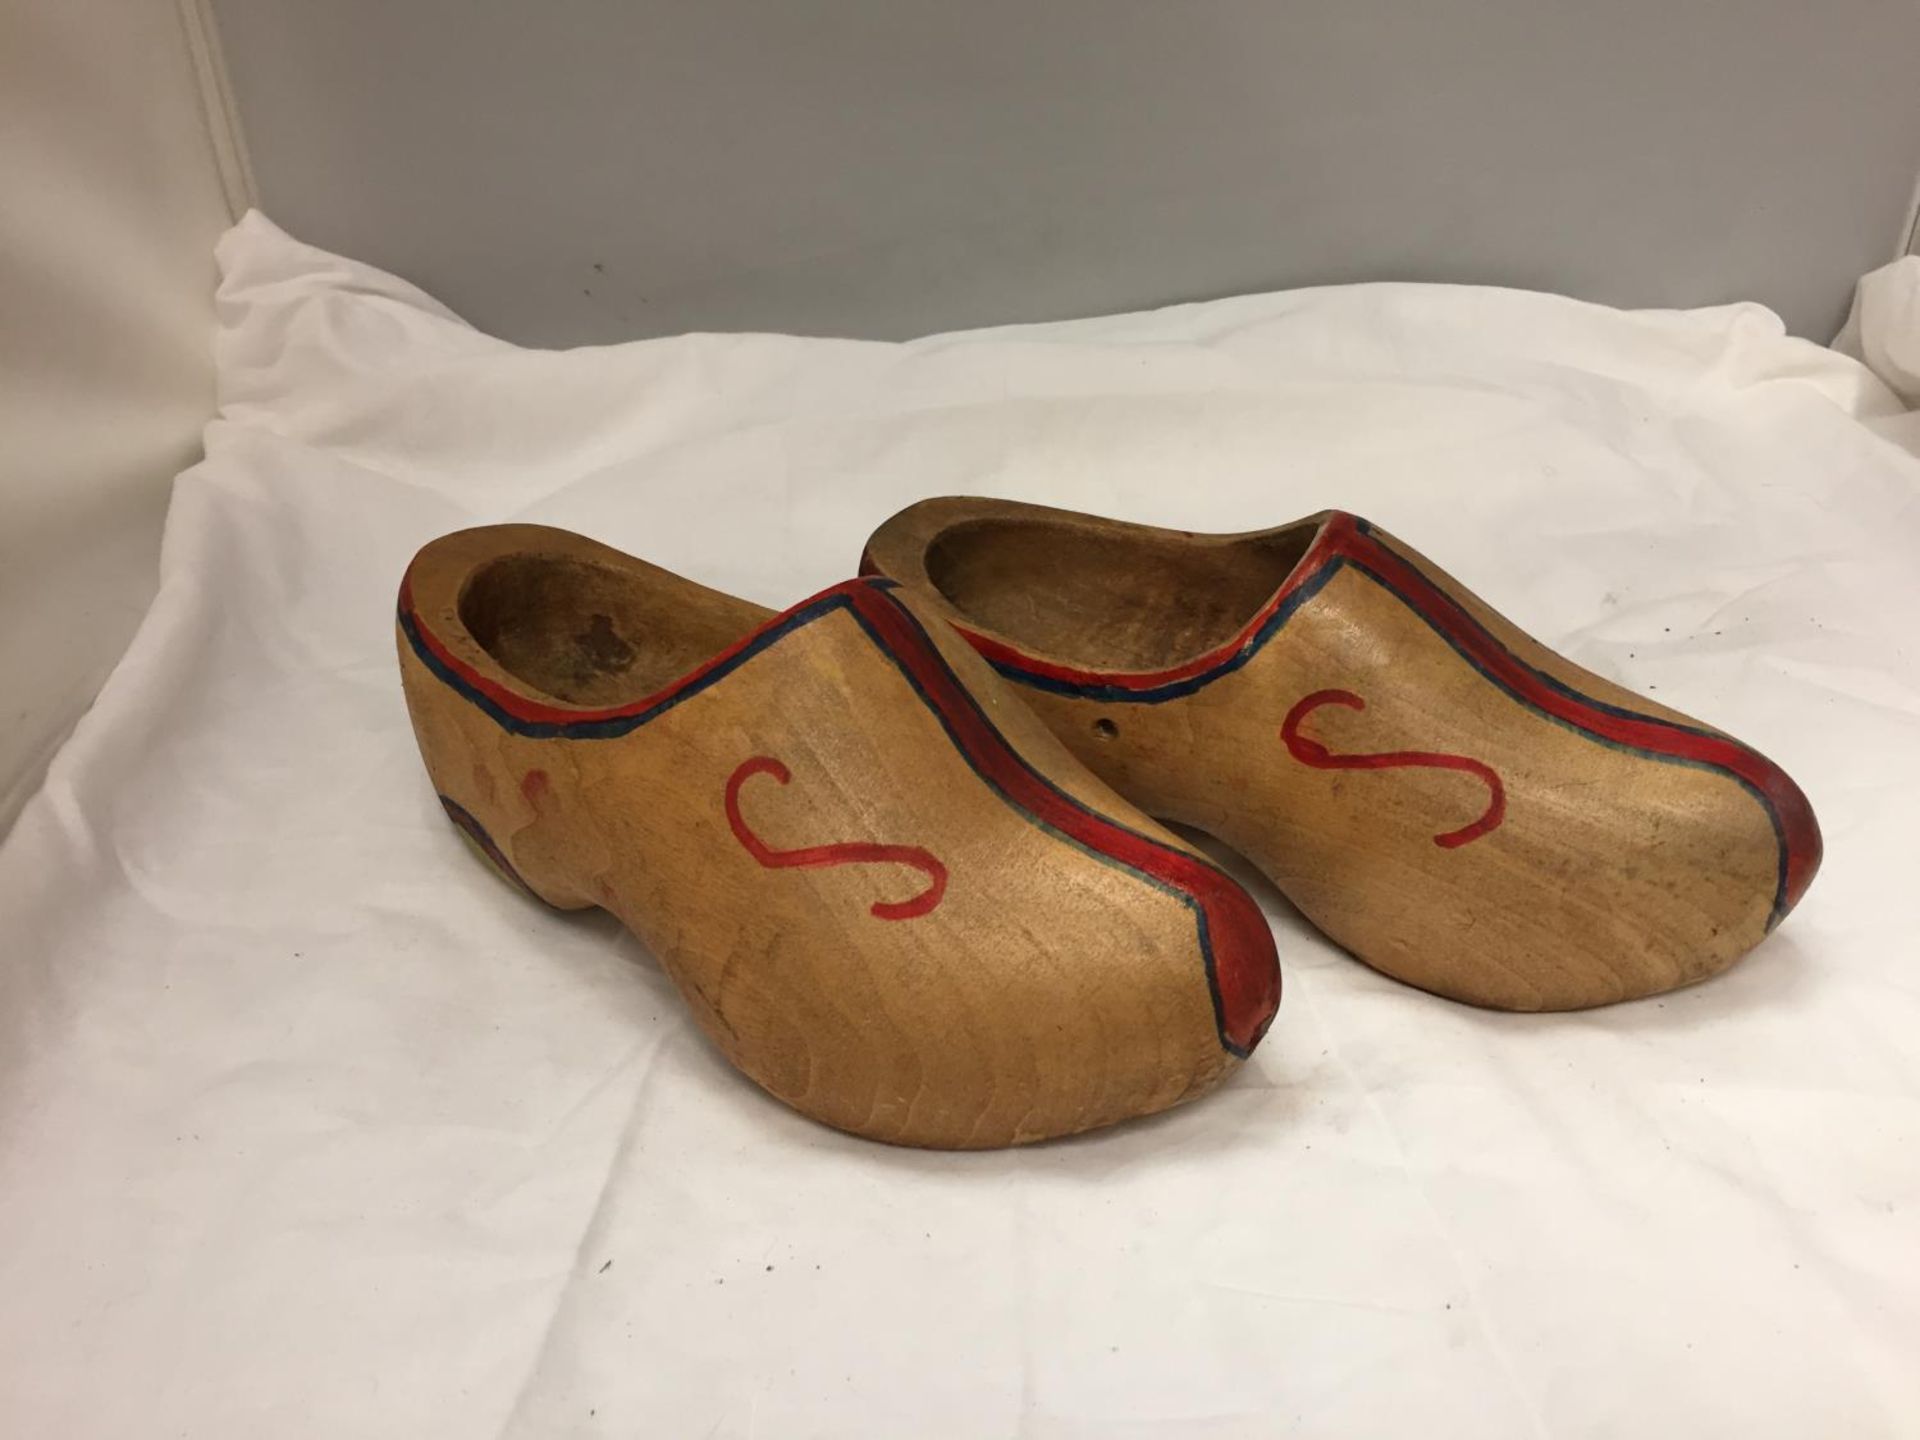 A PAIR OF WOODEN CLOGS